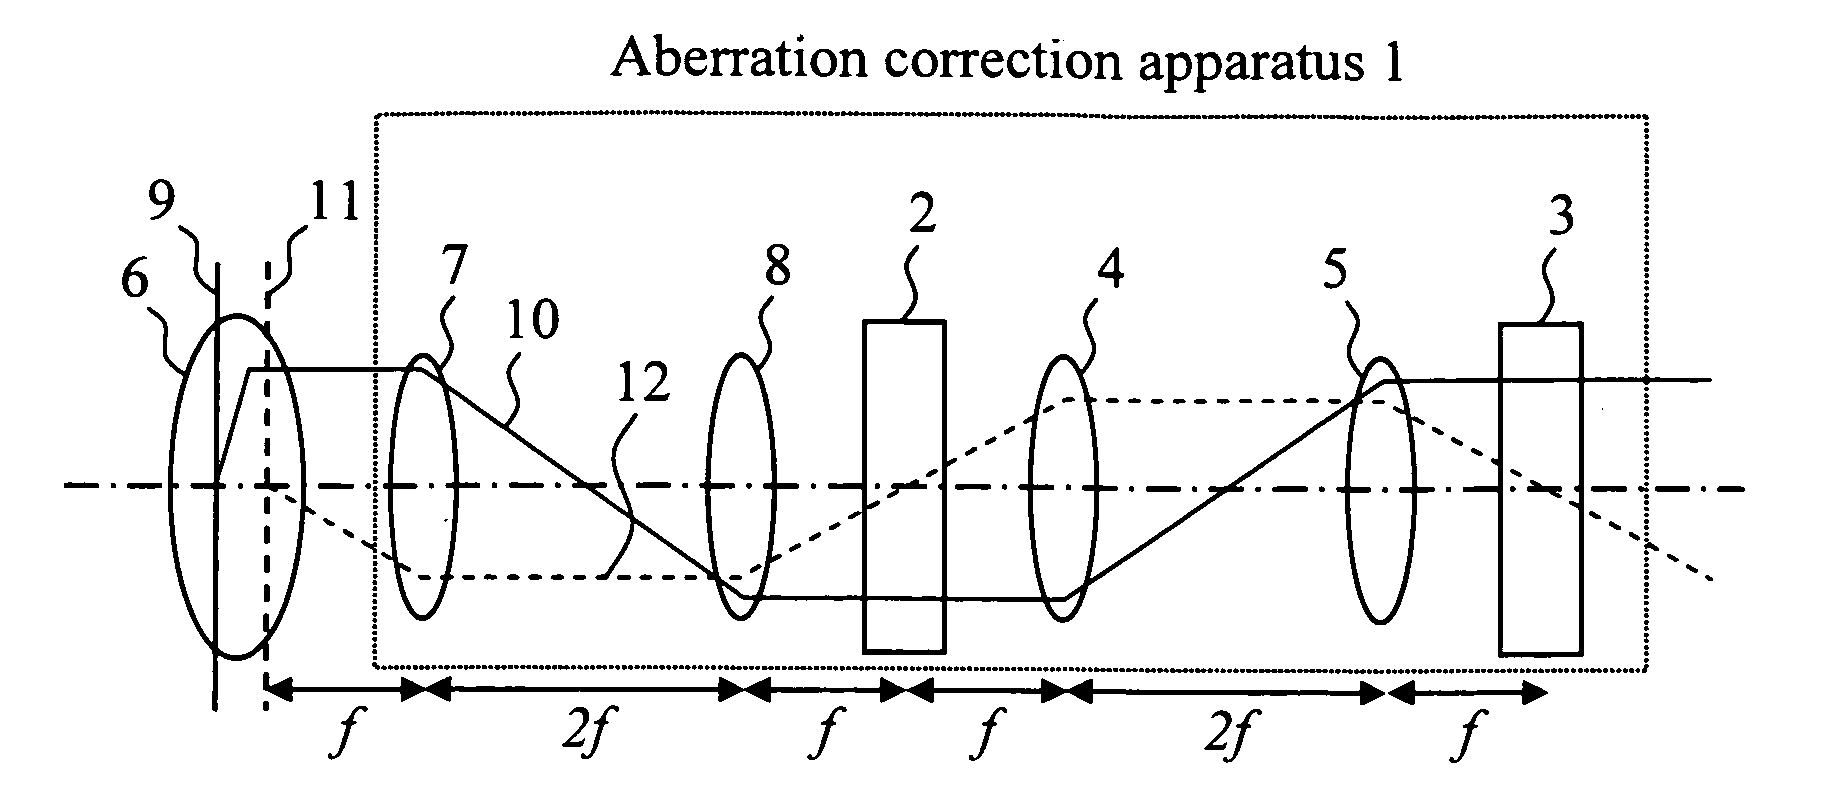 Aberration correction apparatus that corrects spherical aberration of charged particle apparatus